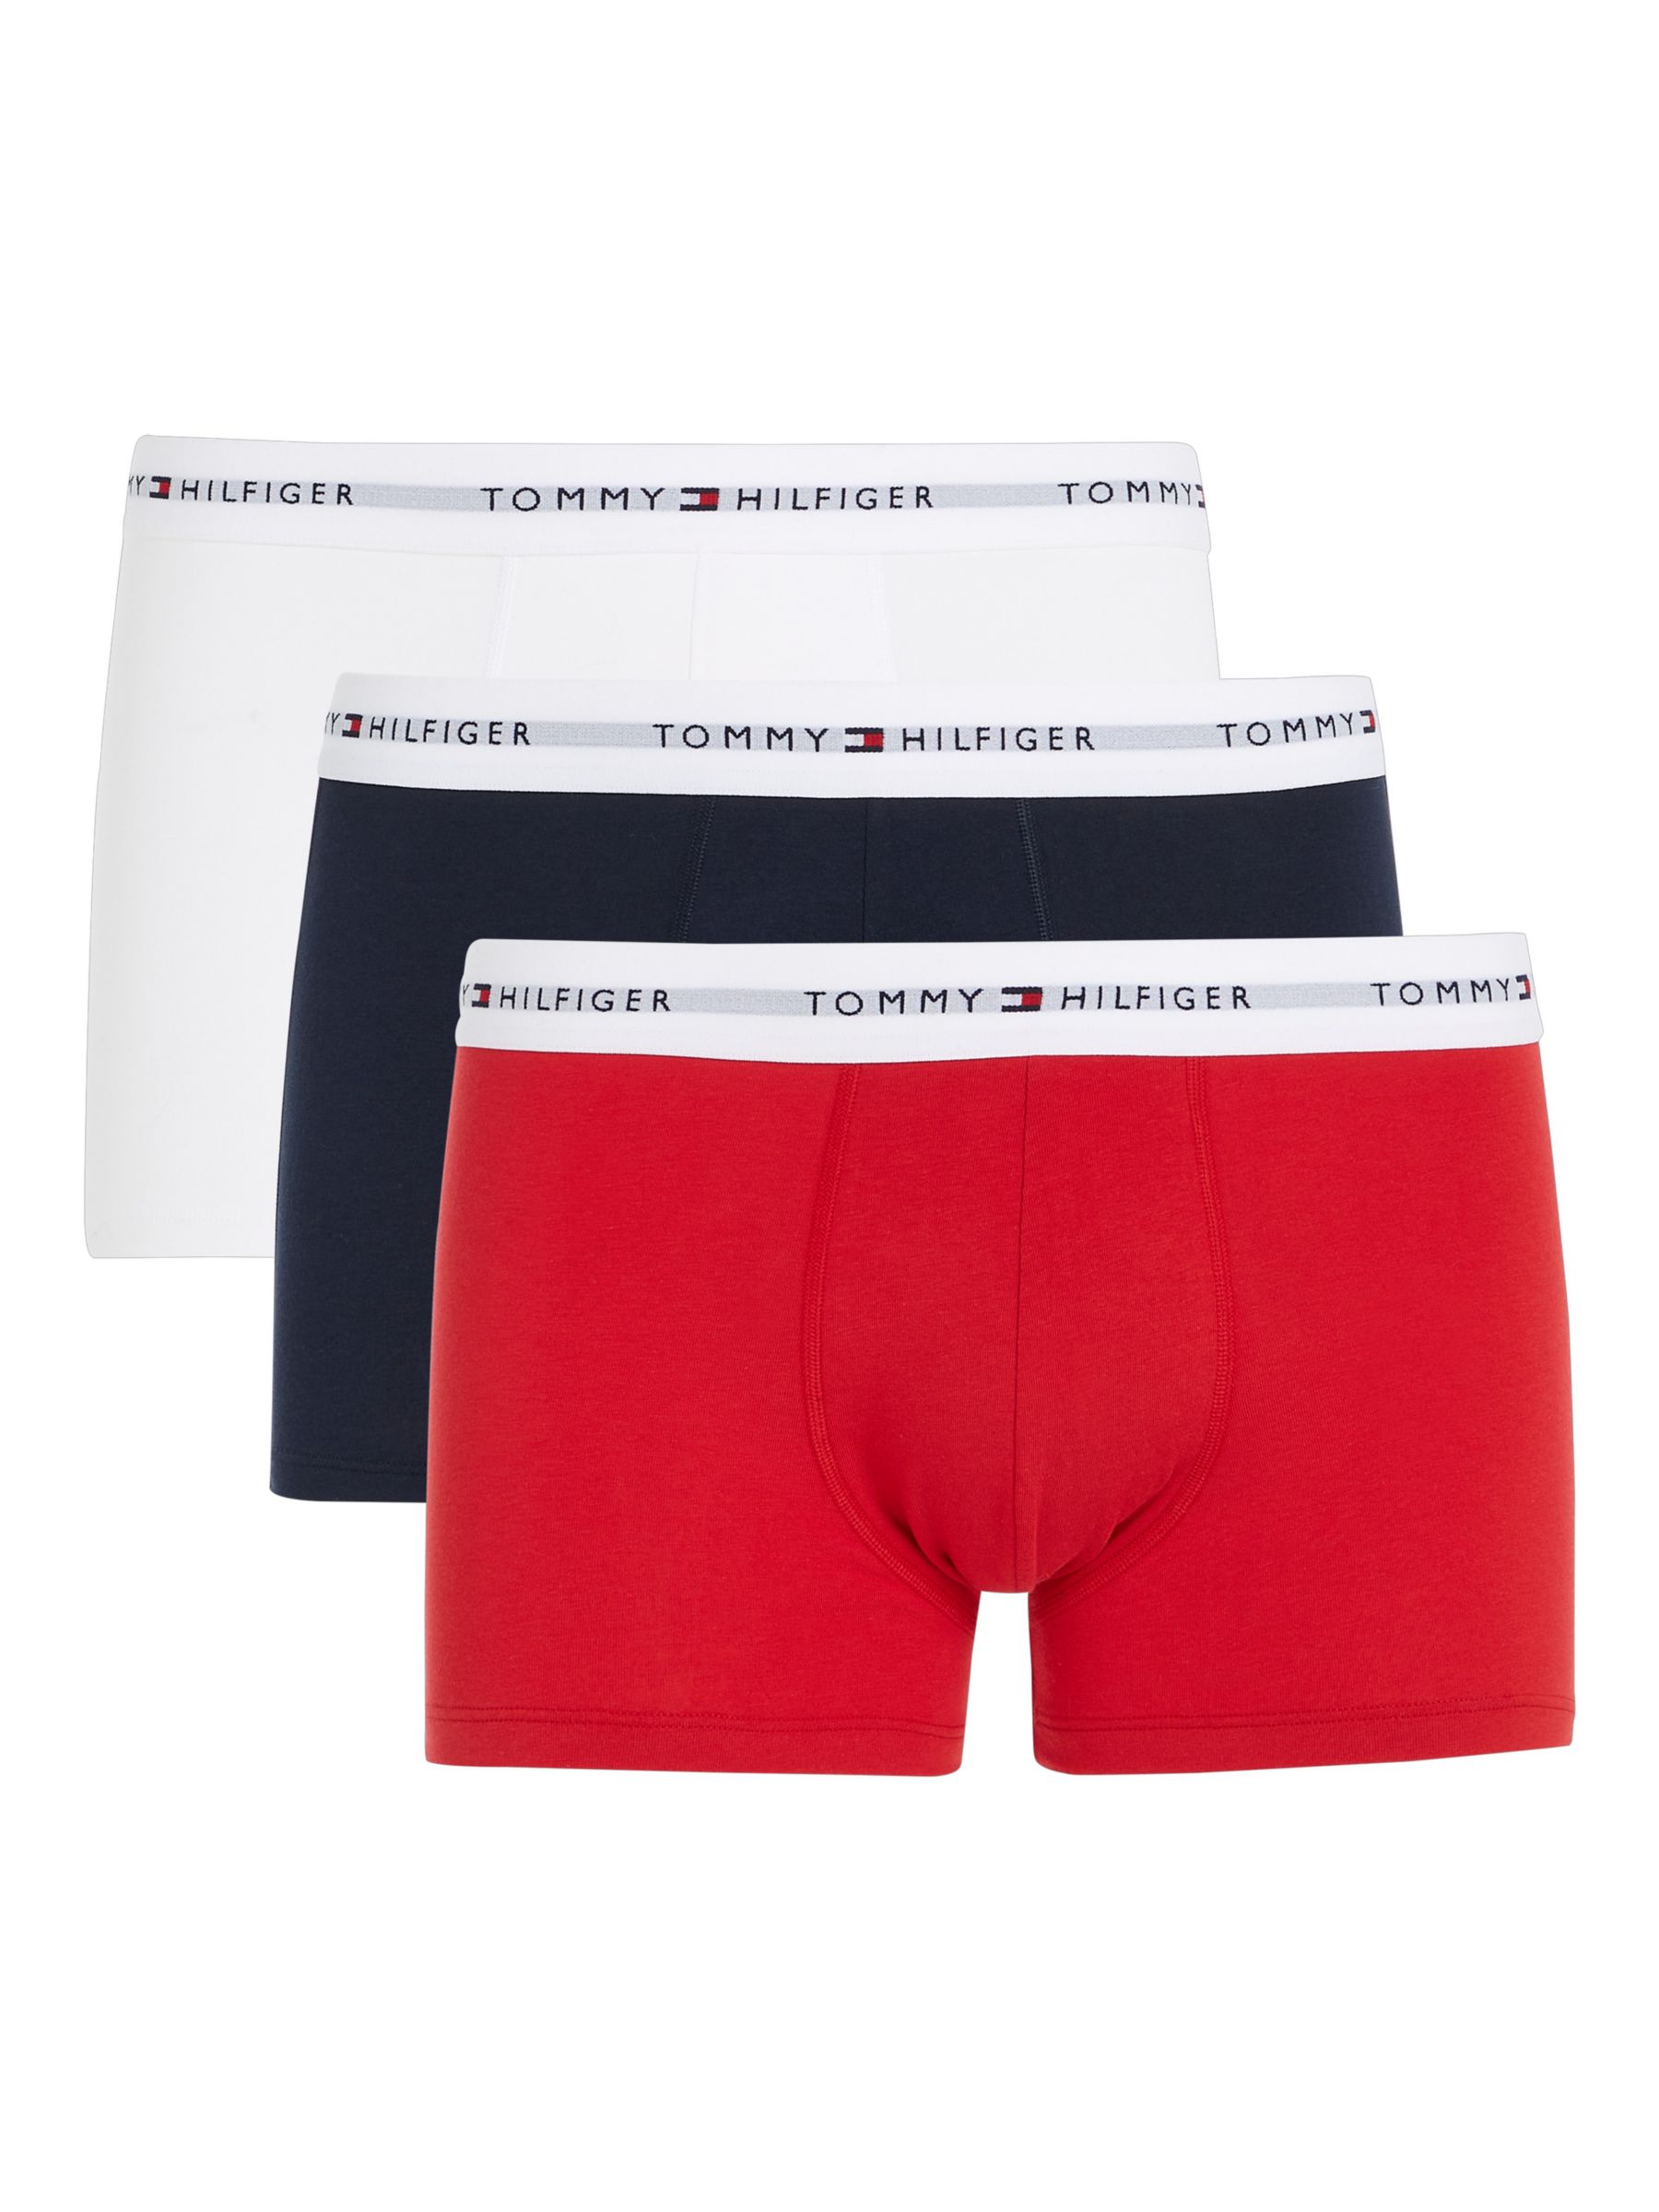 Tommy Hilfiger Essential Logo Waistband Trunks, Pack of 3, Desert Sky/White/Red, L